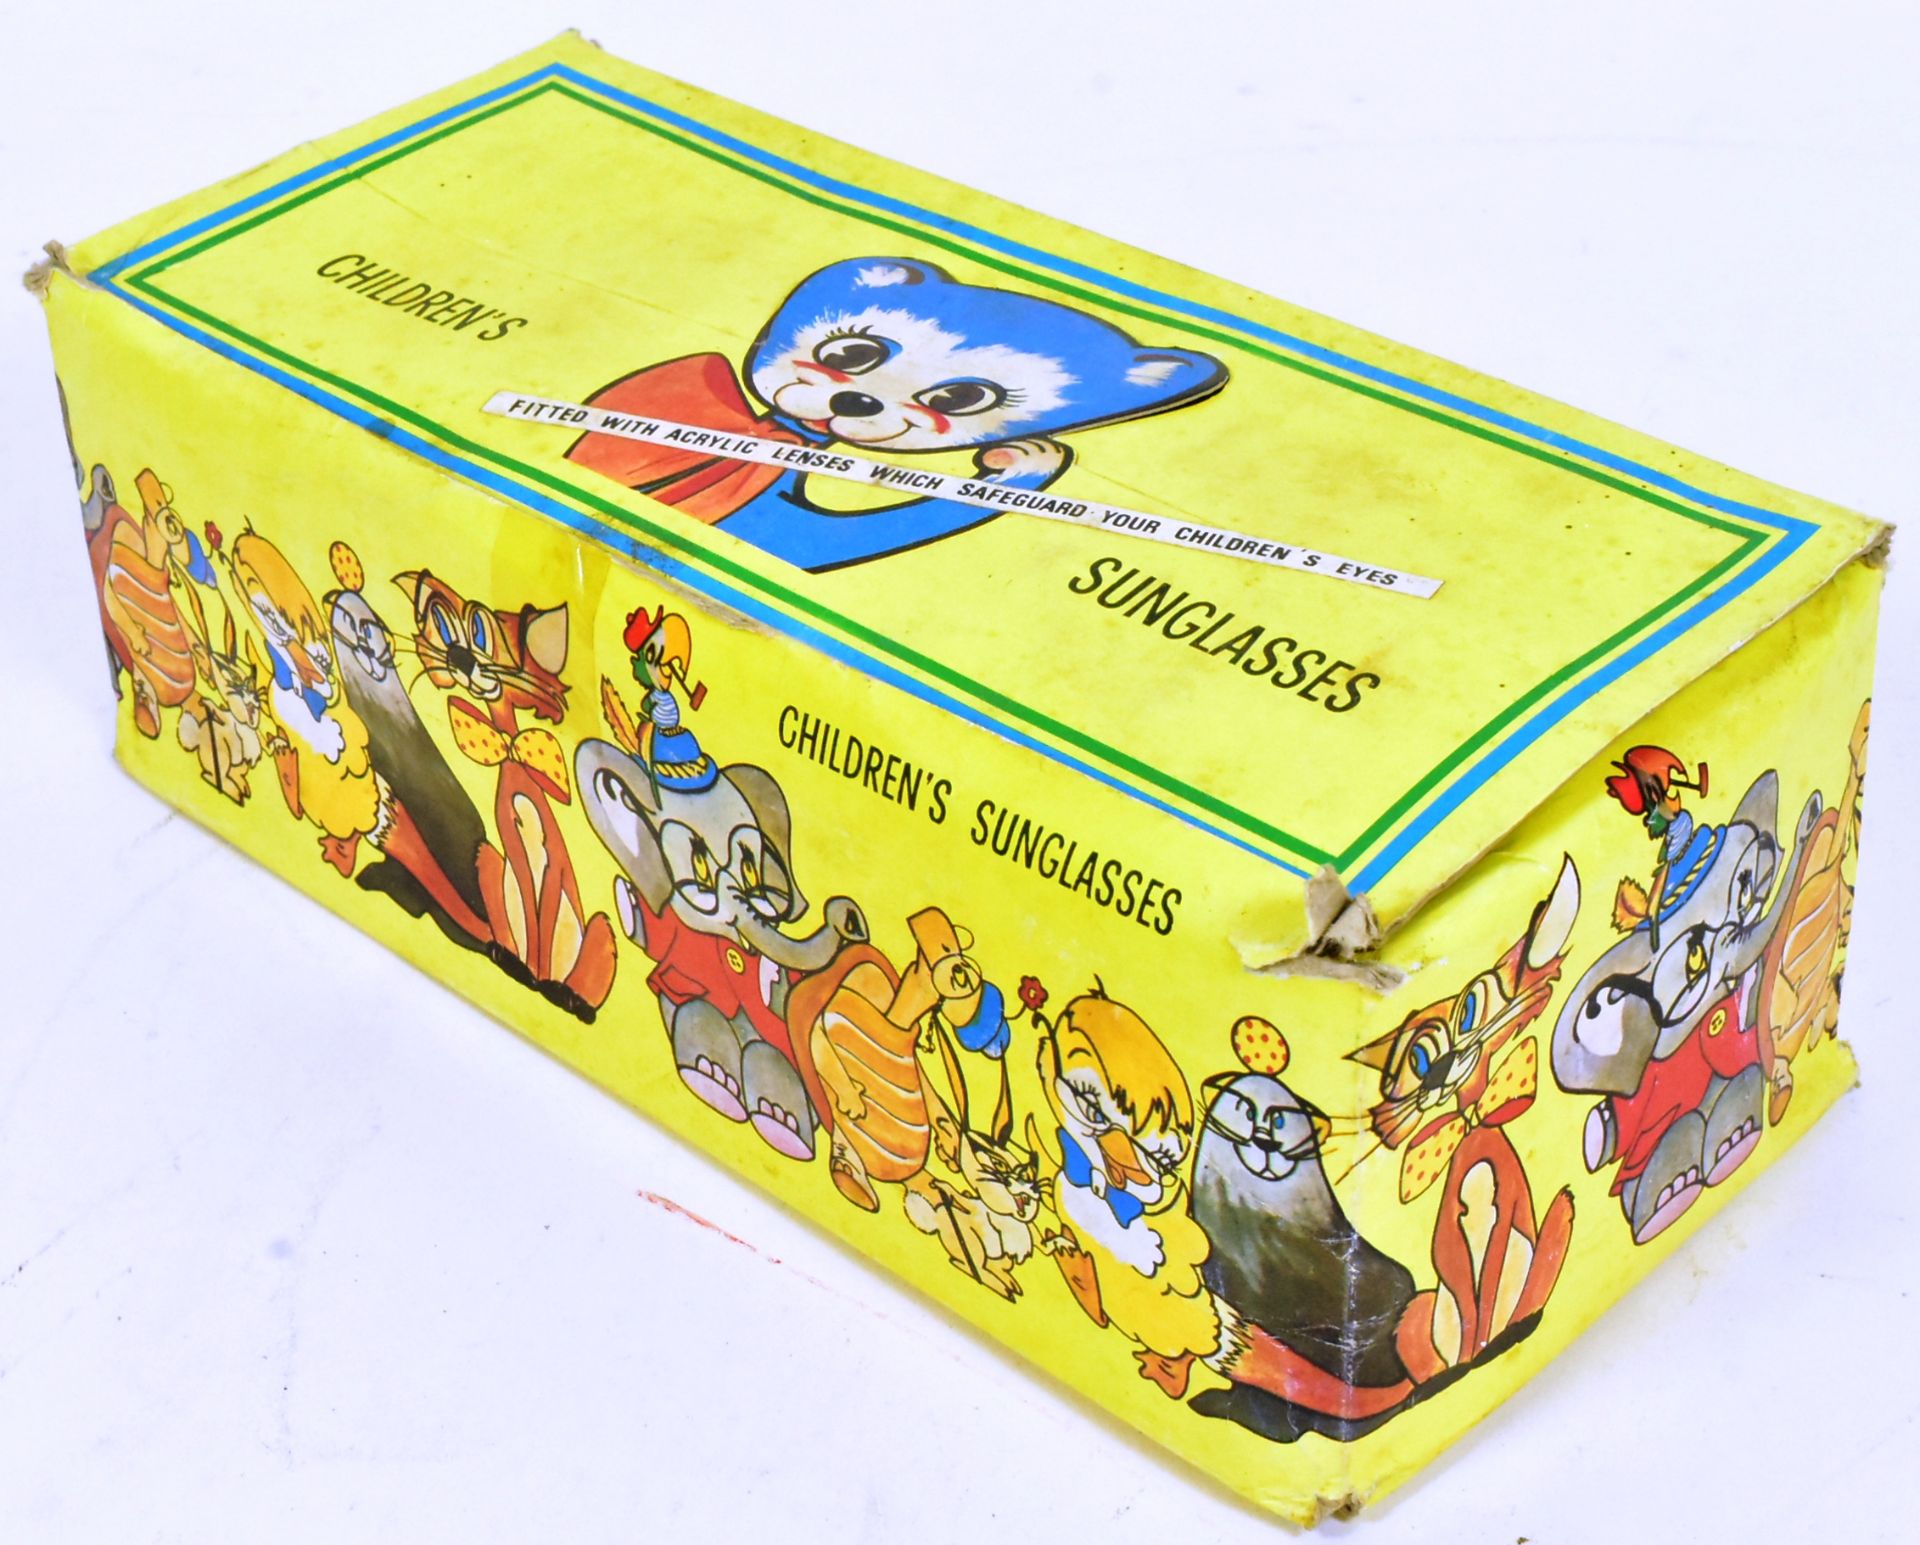 COUNTER TOP DISPLAY BOX - VINTAGE 'CHILDREN'S SUNGLASSES' - Image 4 of 5